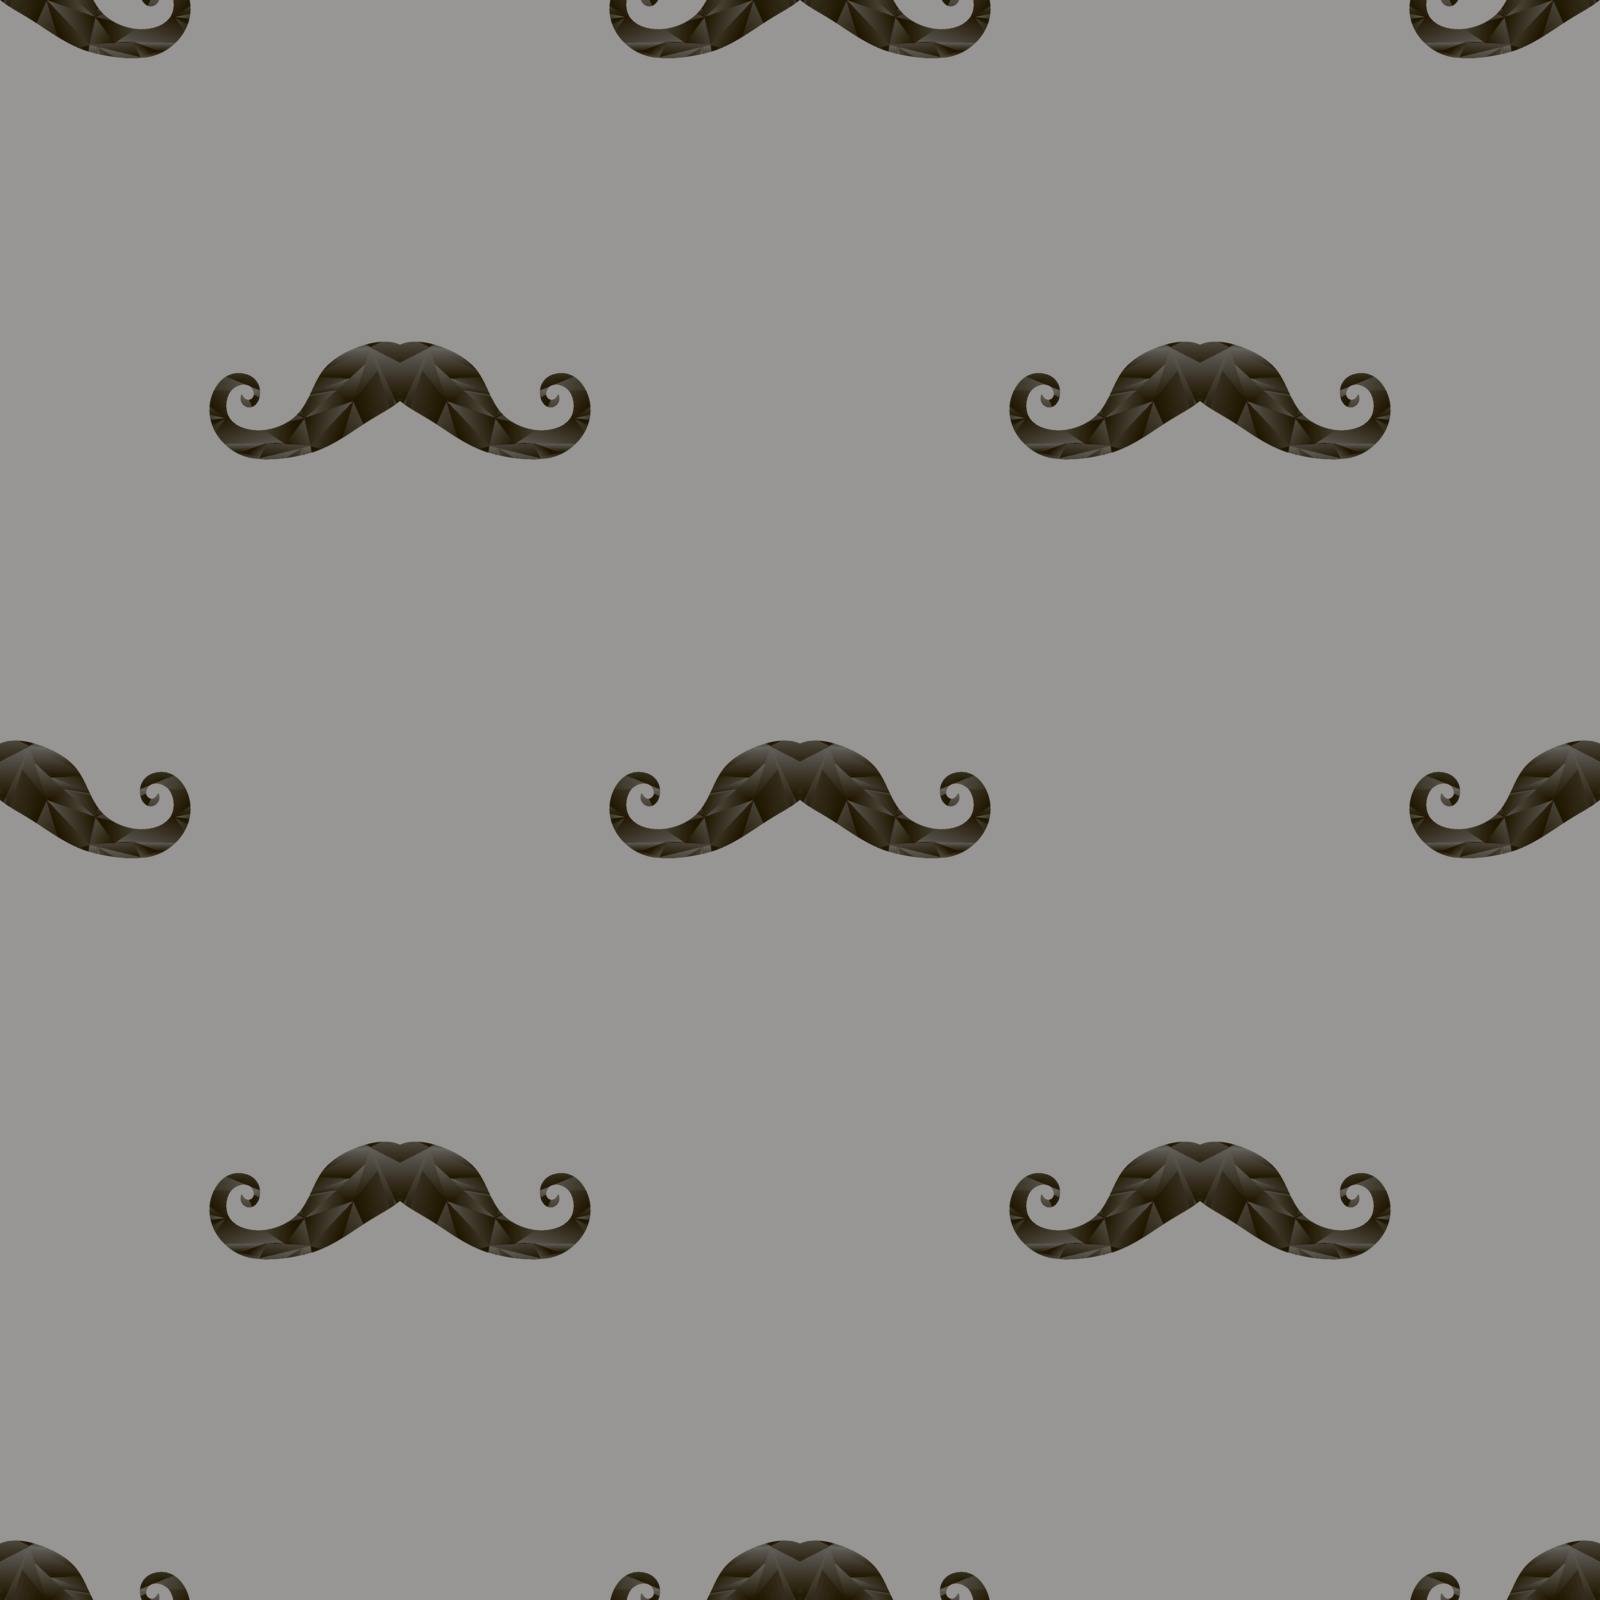 Black Hairy Mustache Silhouettes Seamless Pattern on Grey Background